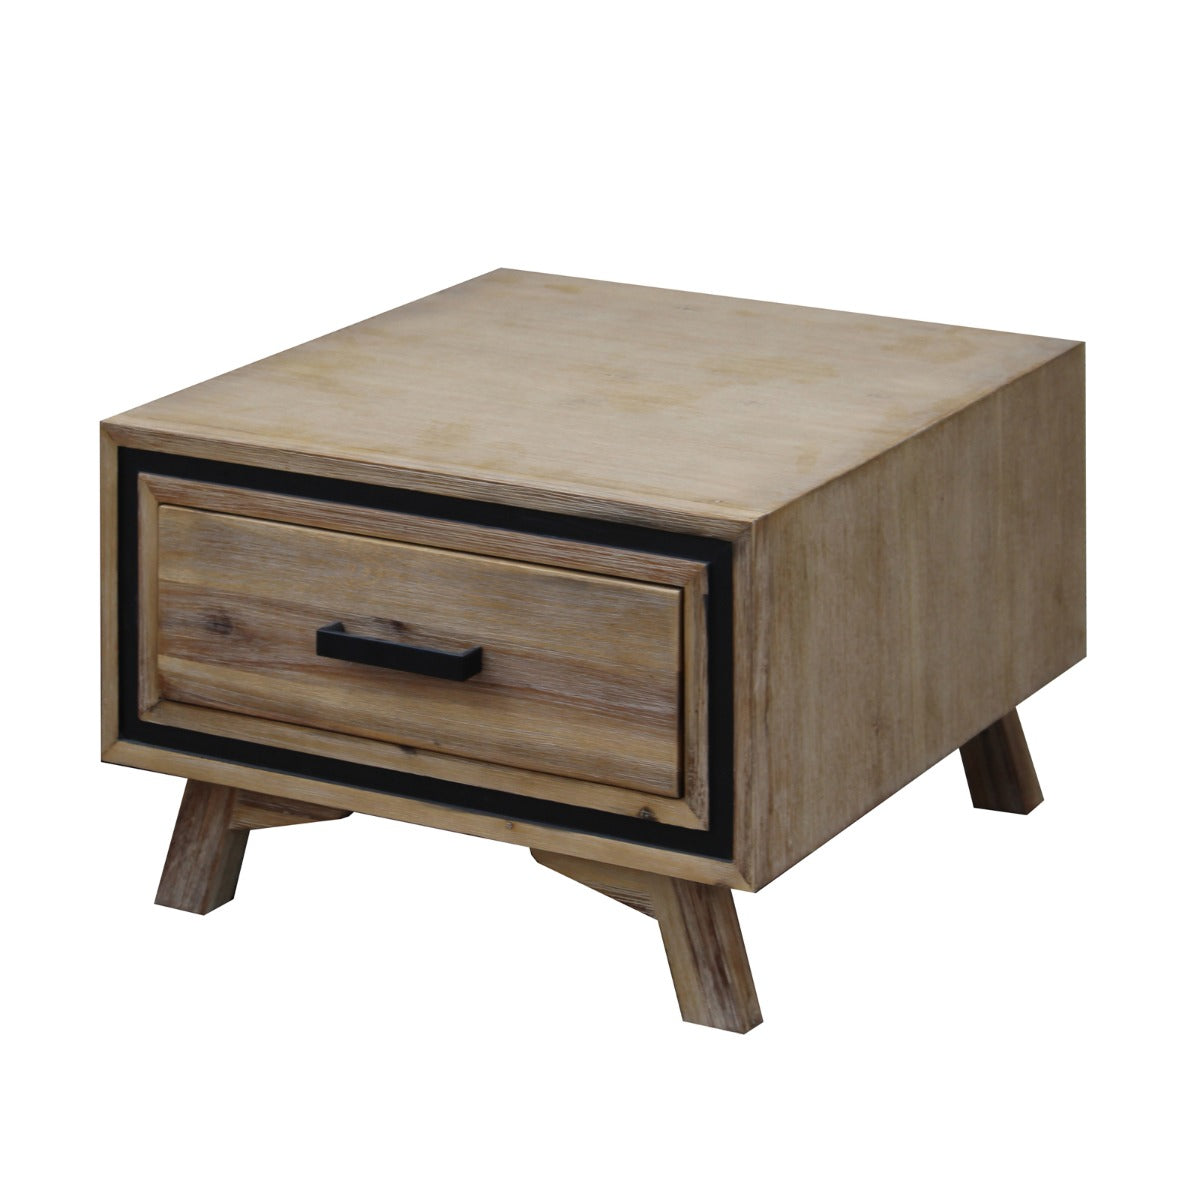 Lamp Table with 1 Storage Drawer Solid Wooden Frame in Silver Brush Colour